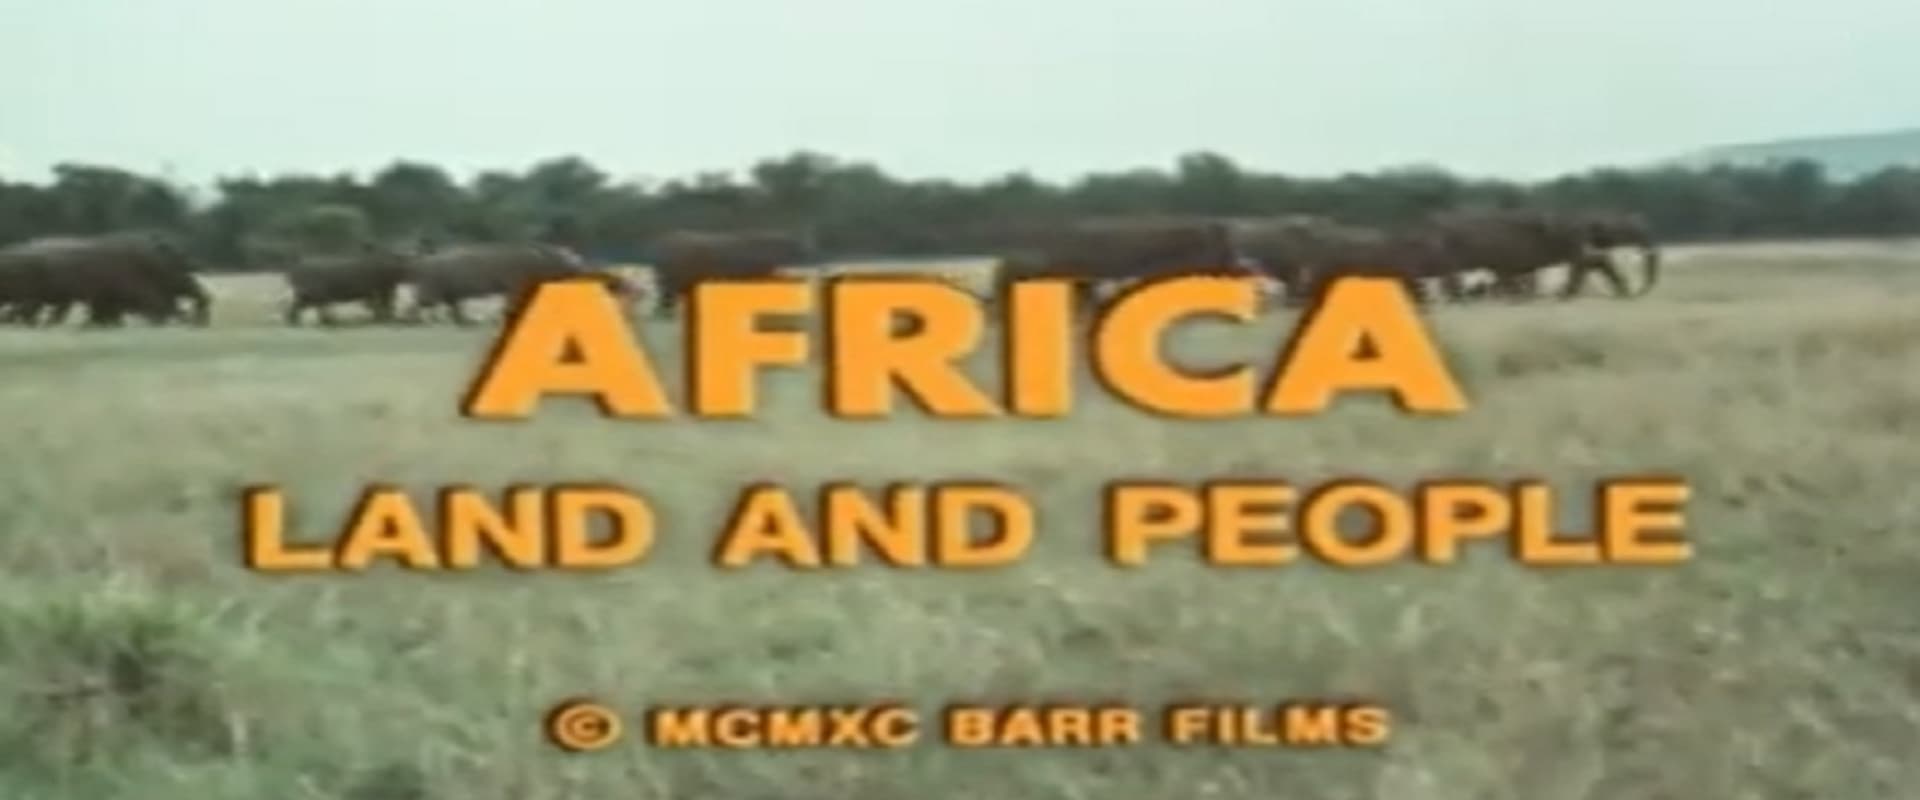 Africa: Land and People